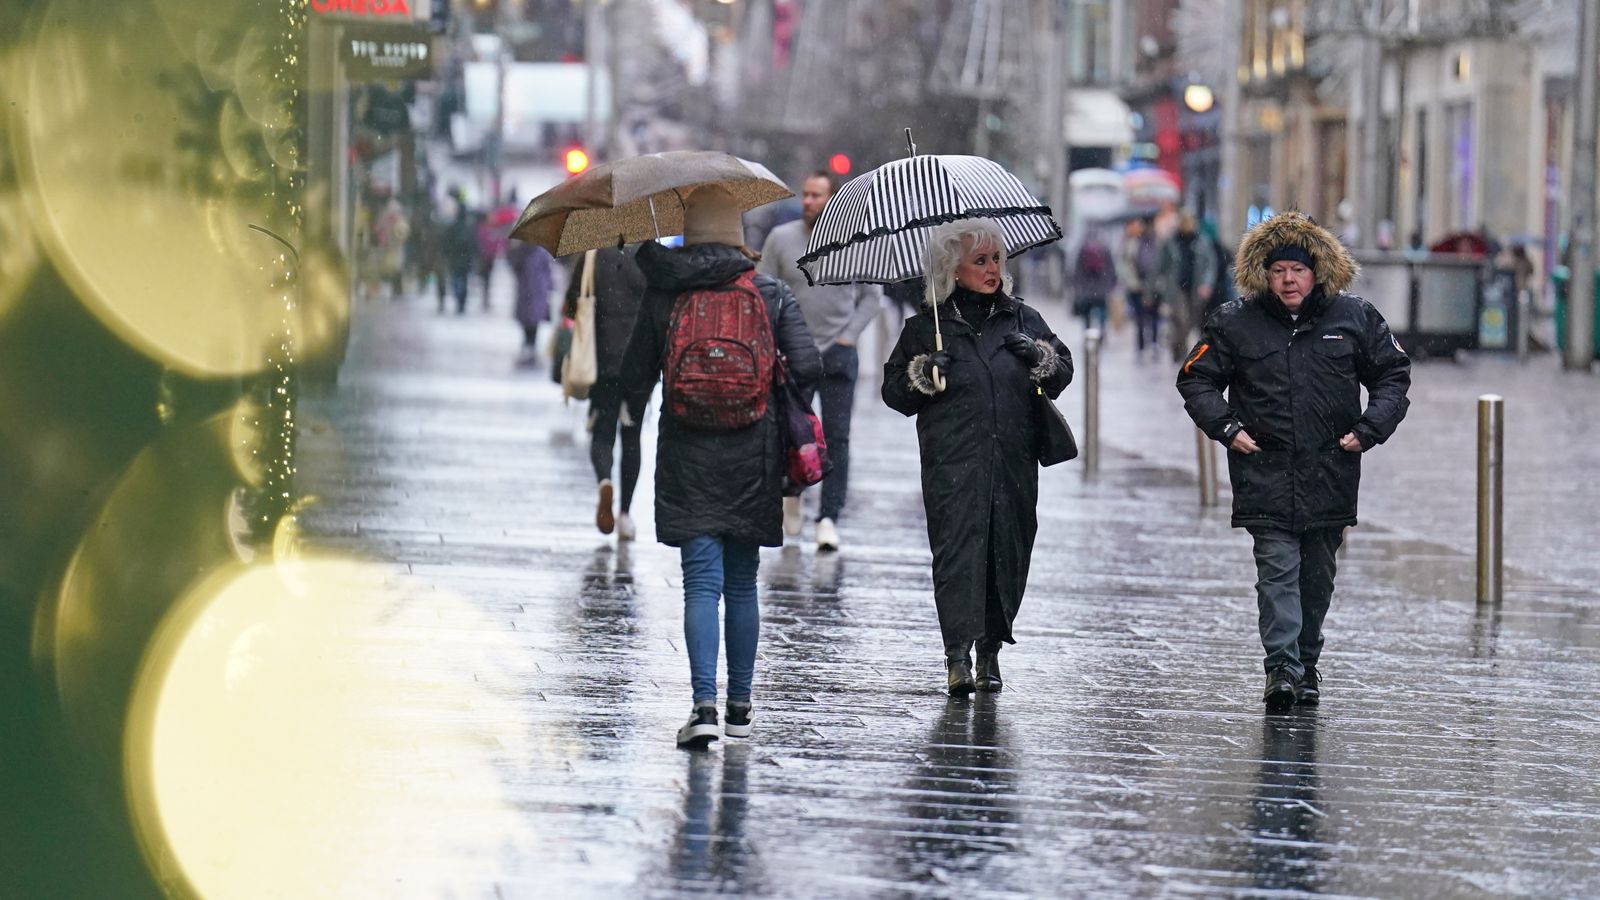 UK weather: More Met Office warnings issued as heavy rain forecast for parts of the UK